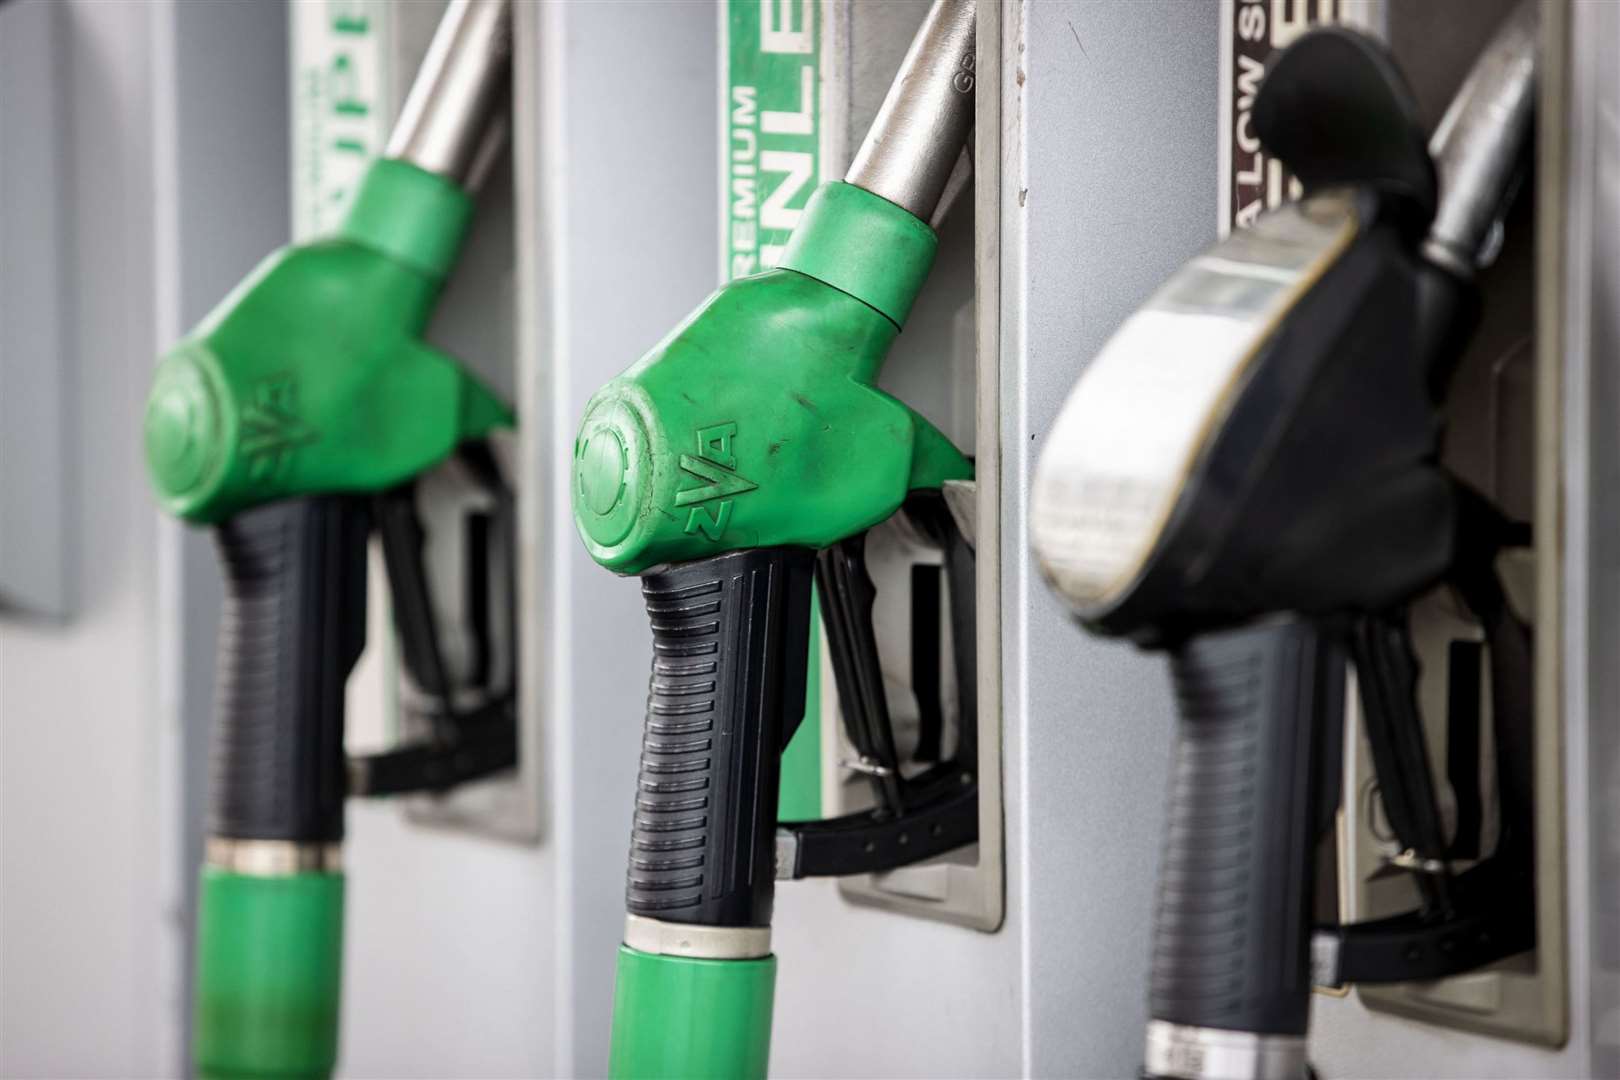 The cost of petrol has risen for the ninth month in a row and shows no signs of slowing